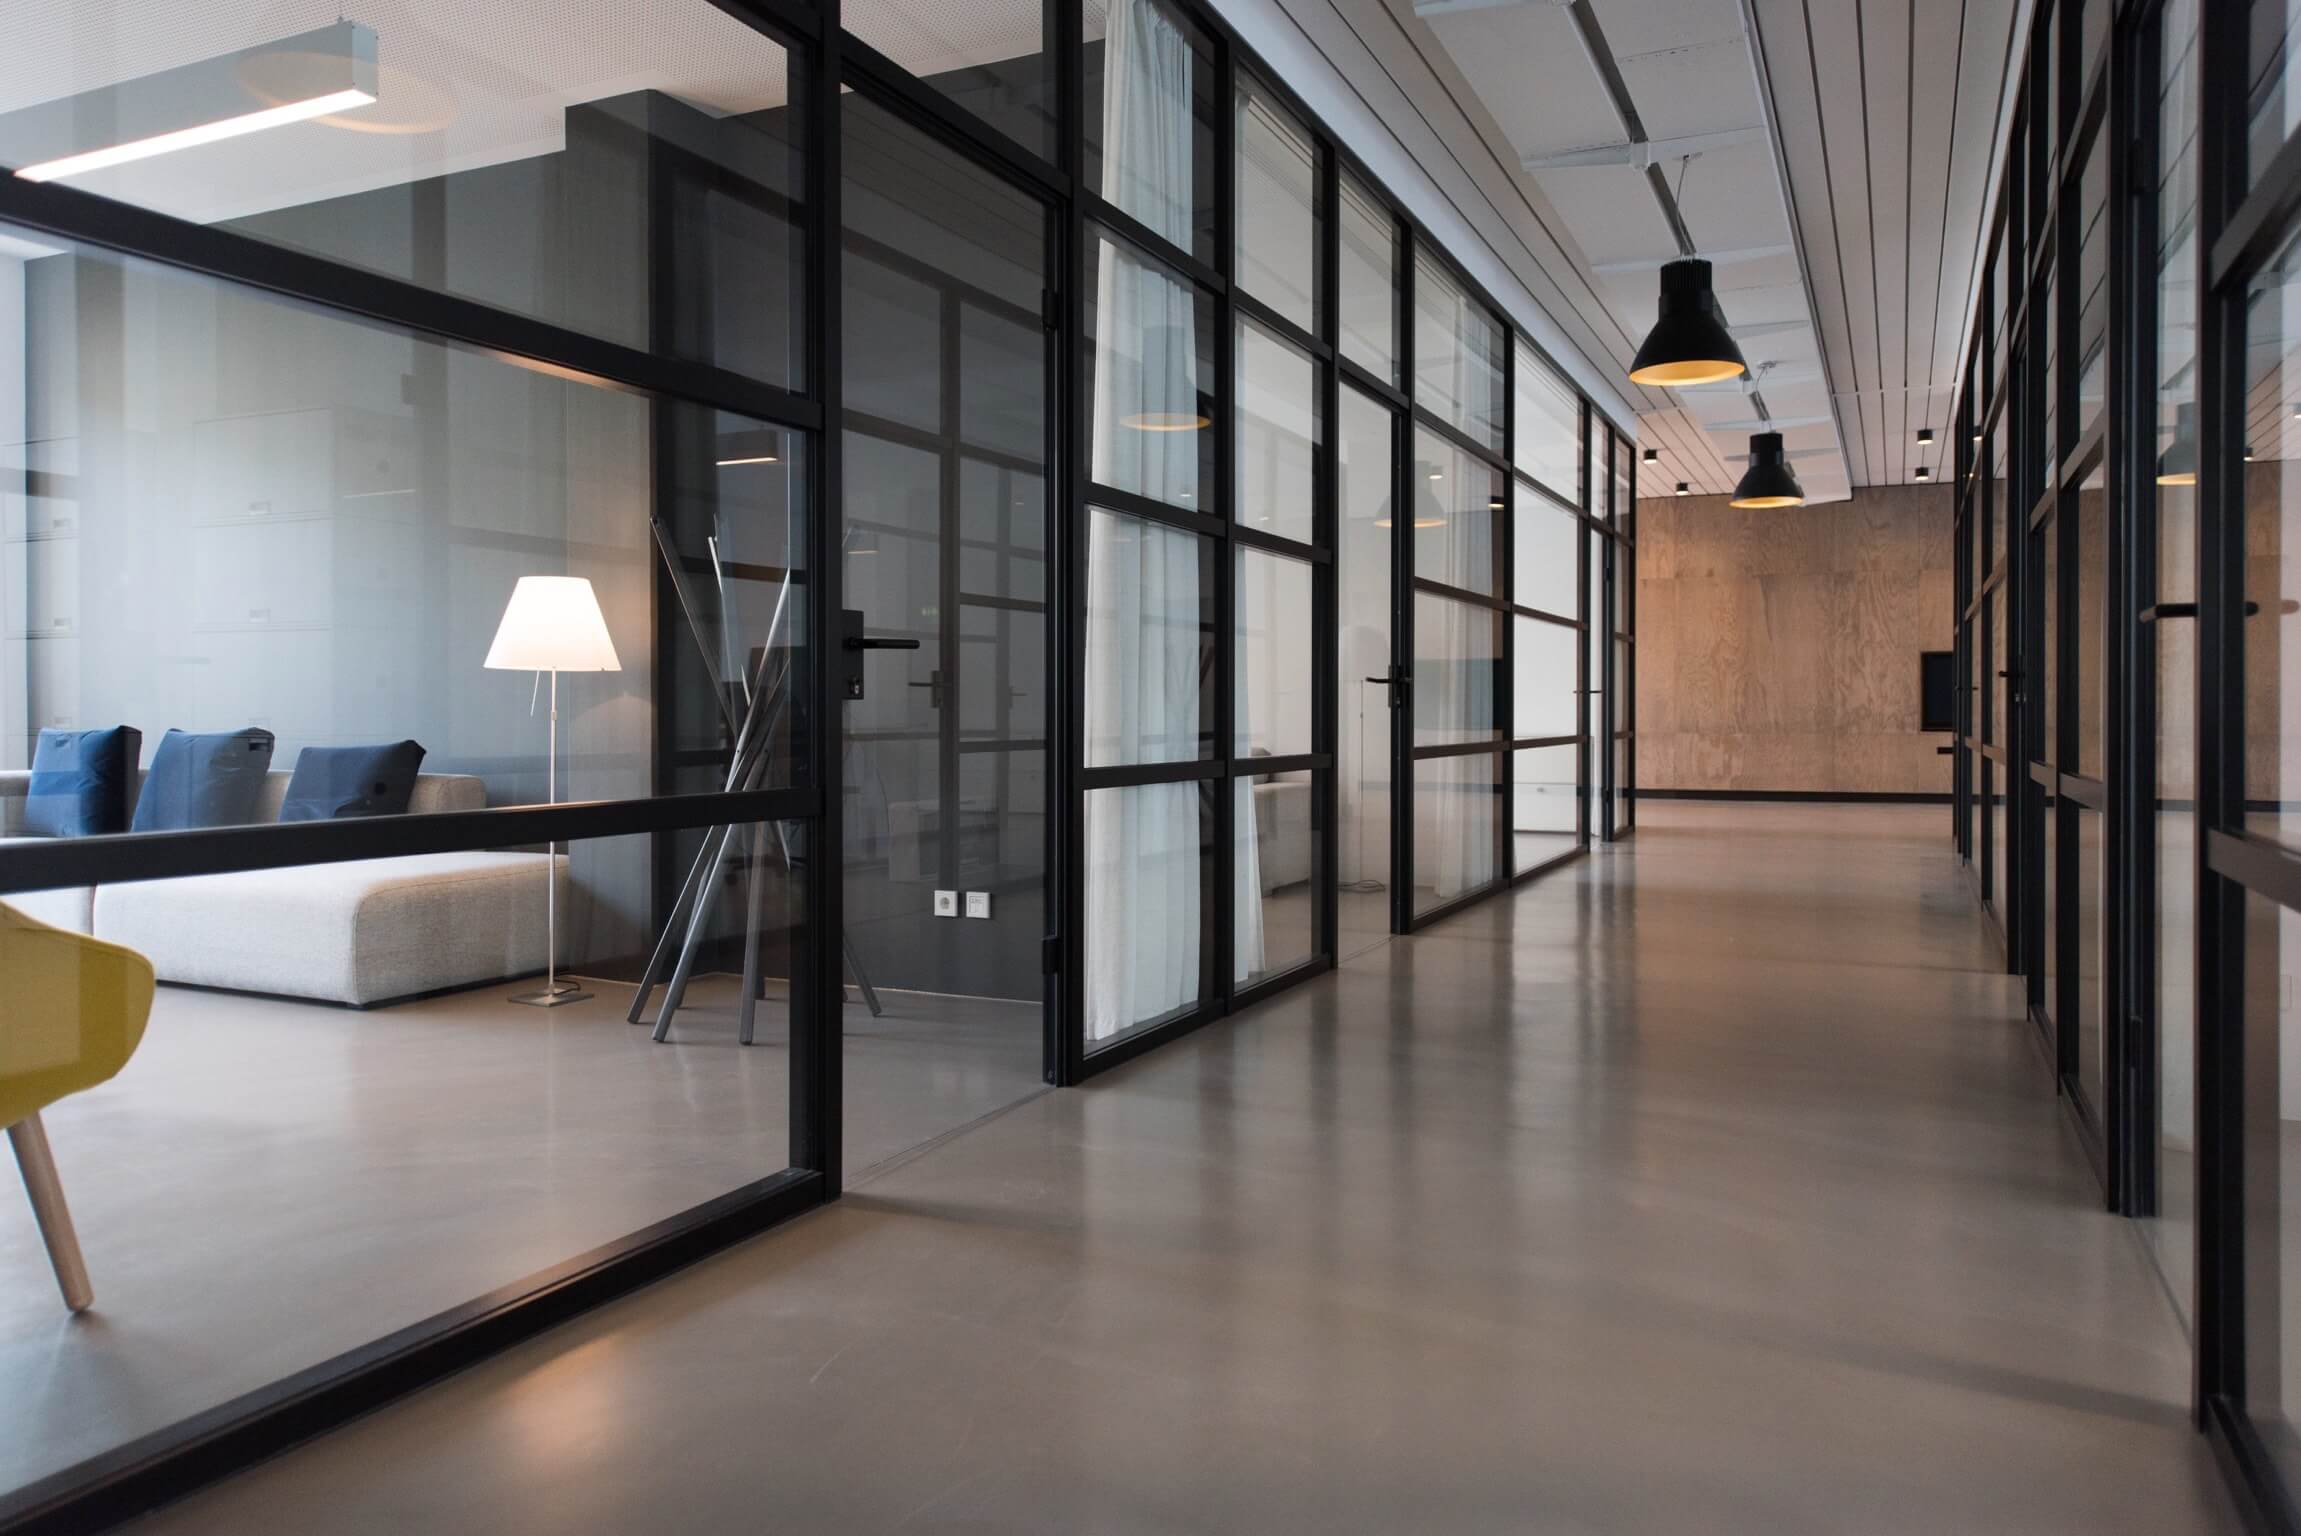 A hallway in a corporate office with glass walls partitioning offices